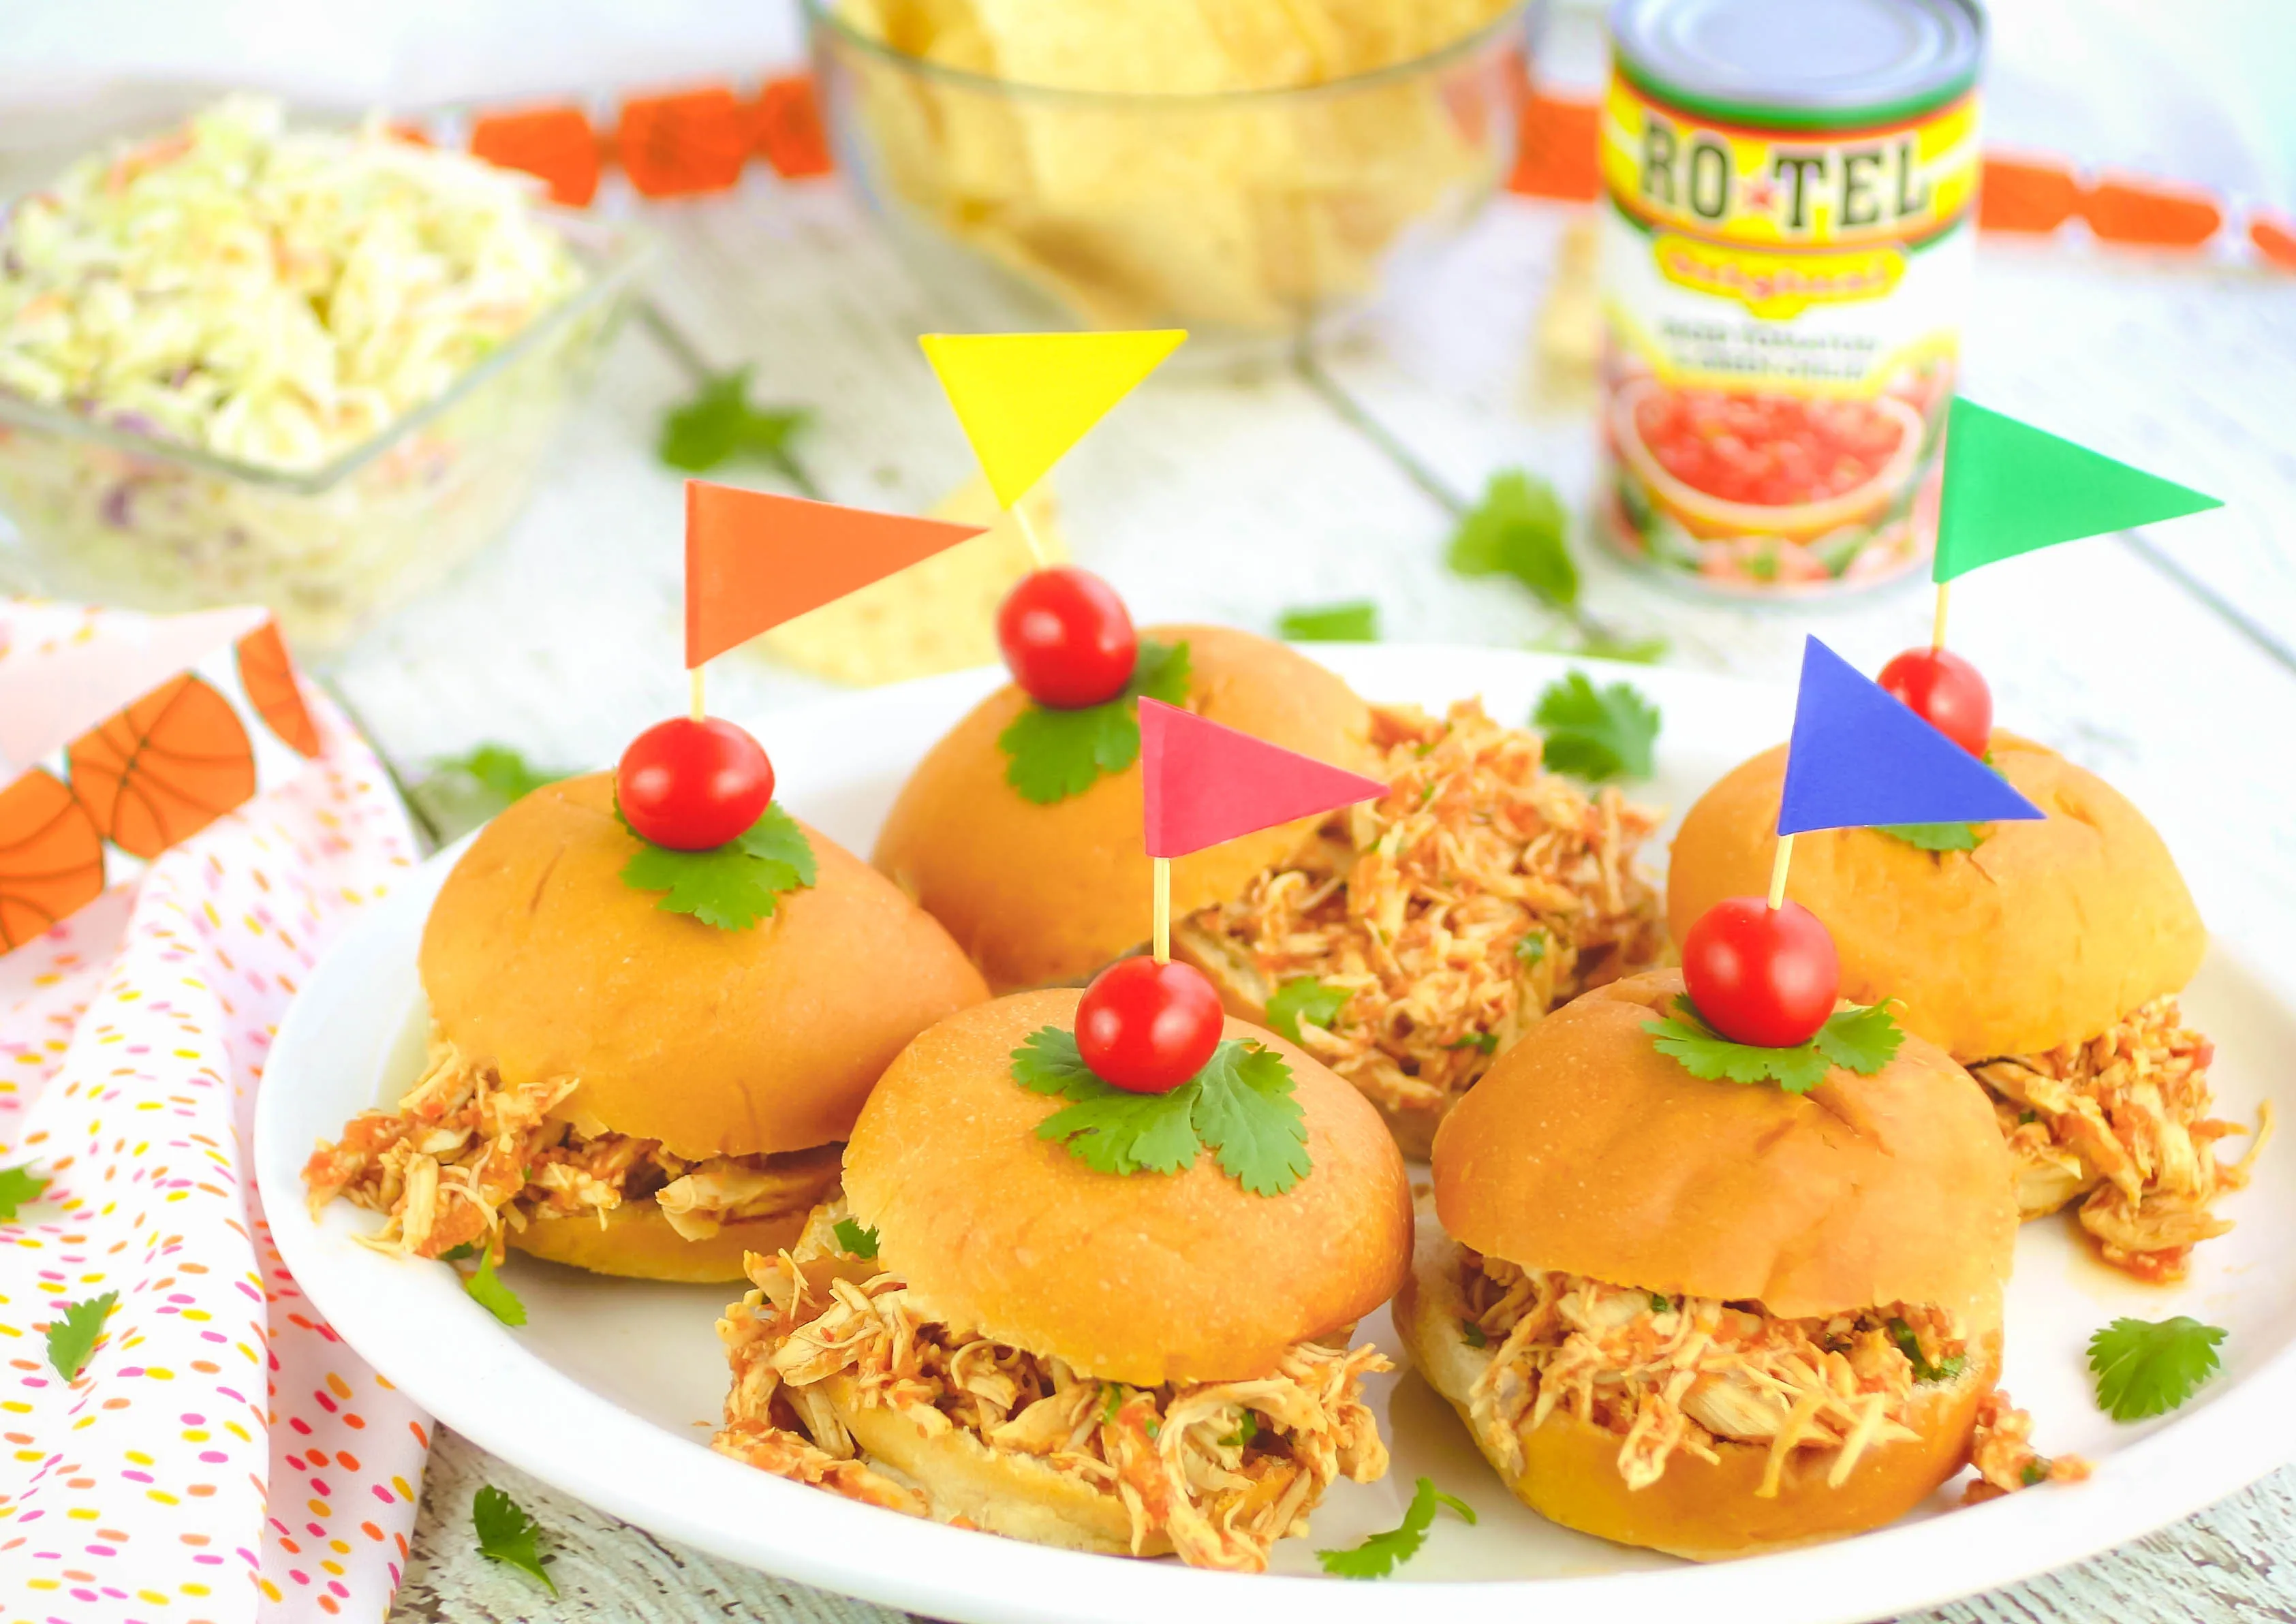 Slow Cooker Southwestern Pulled Chicken Sandwiches are ideas for parties. You'll love these Slow Cooker Southwestern Pulled Chicken Sandwiches.